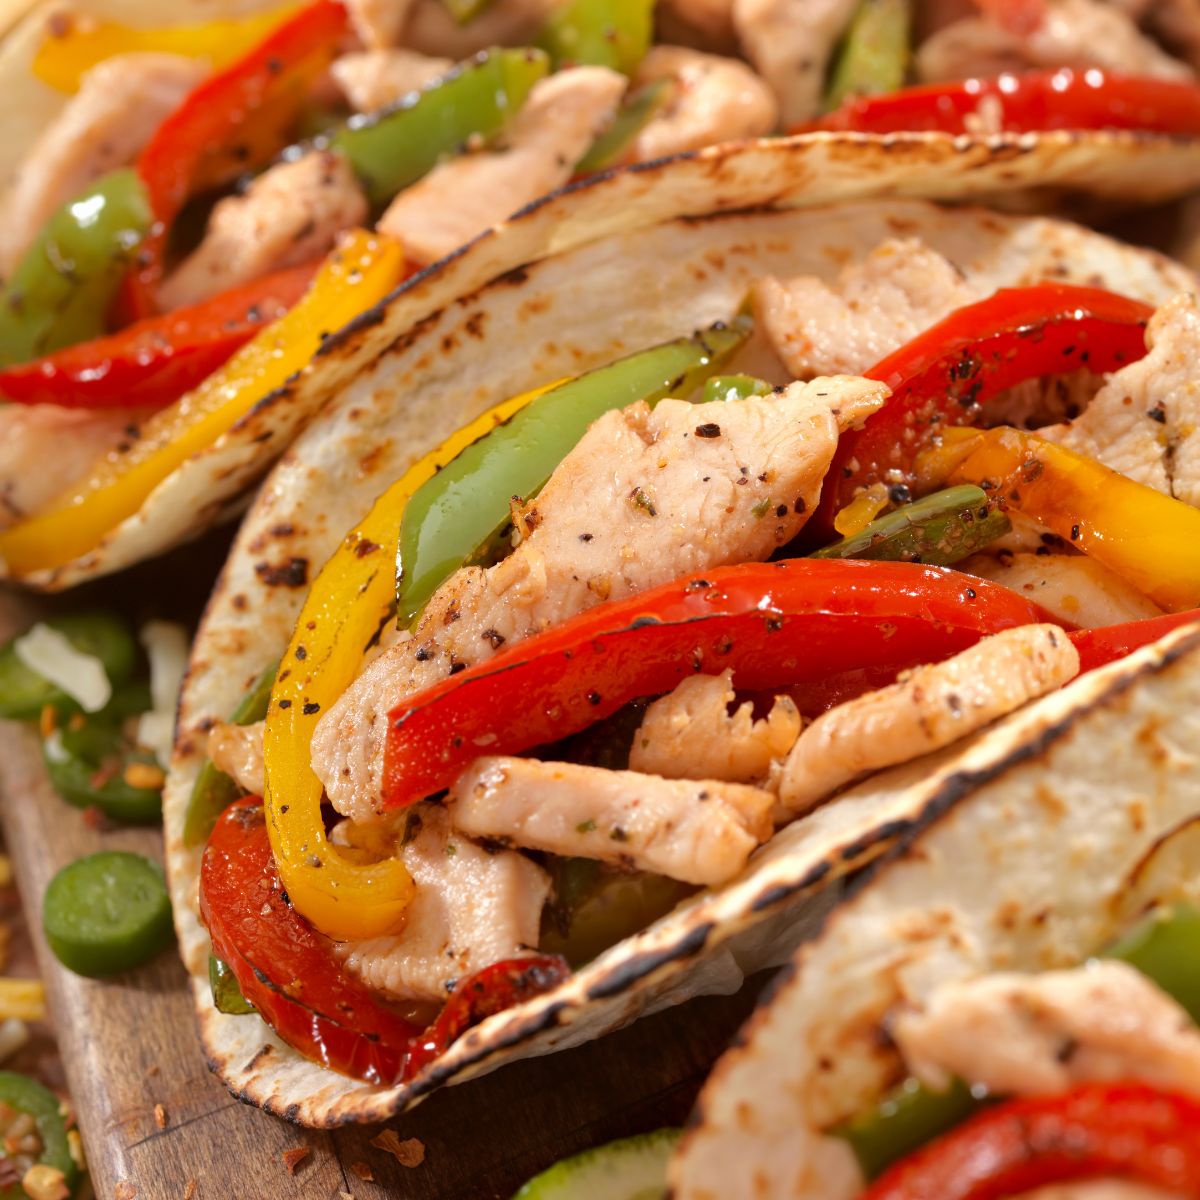 Grilled chicken fajitas with colorful bell peppers and onions served in tortillas.